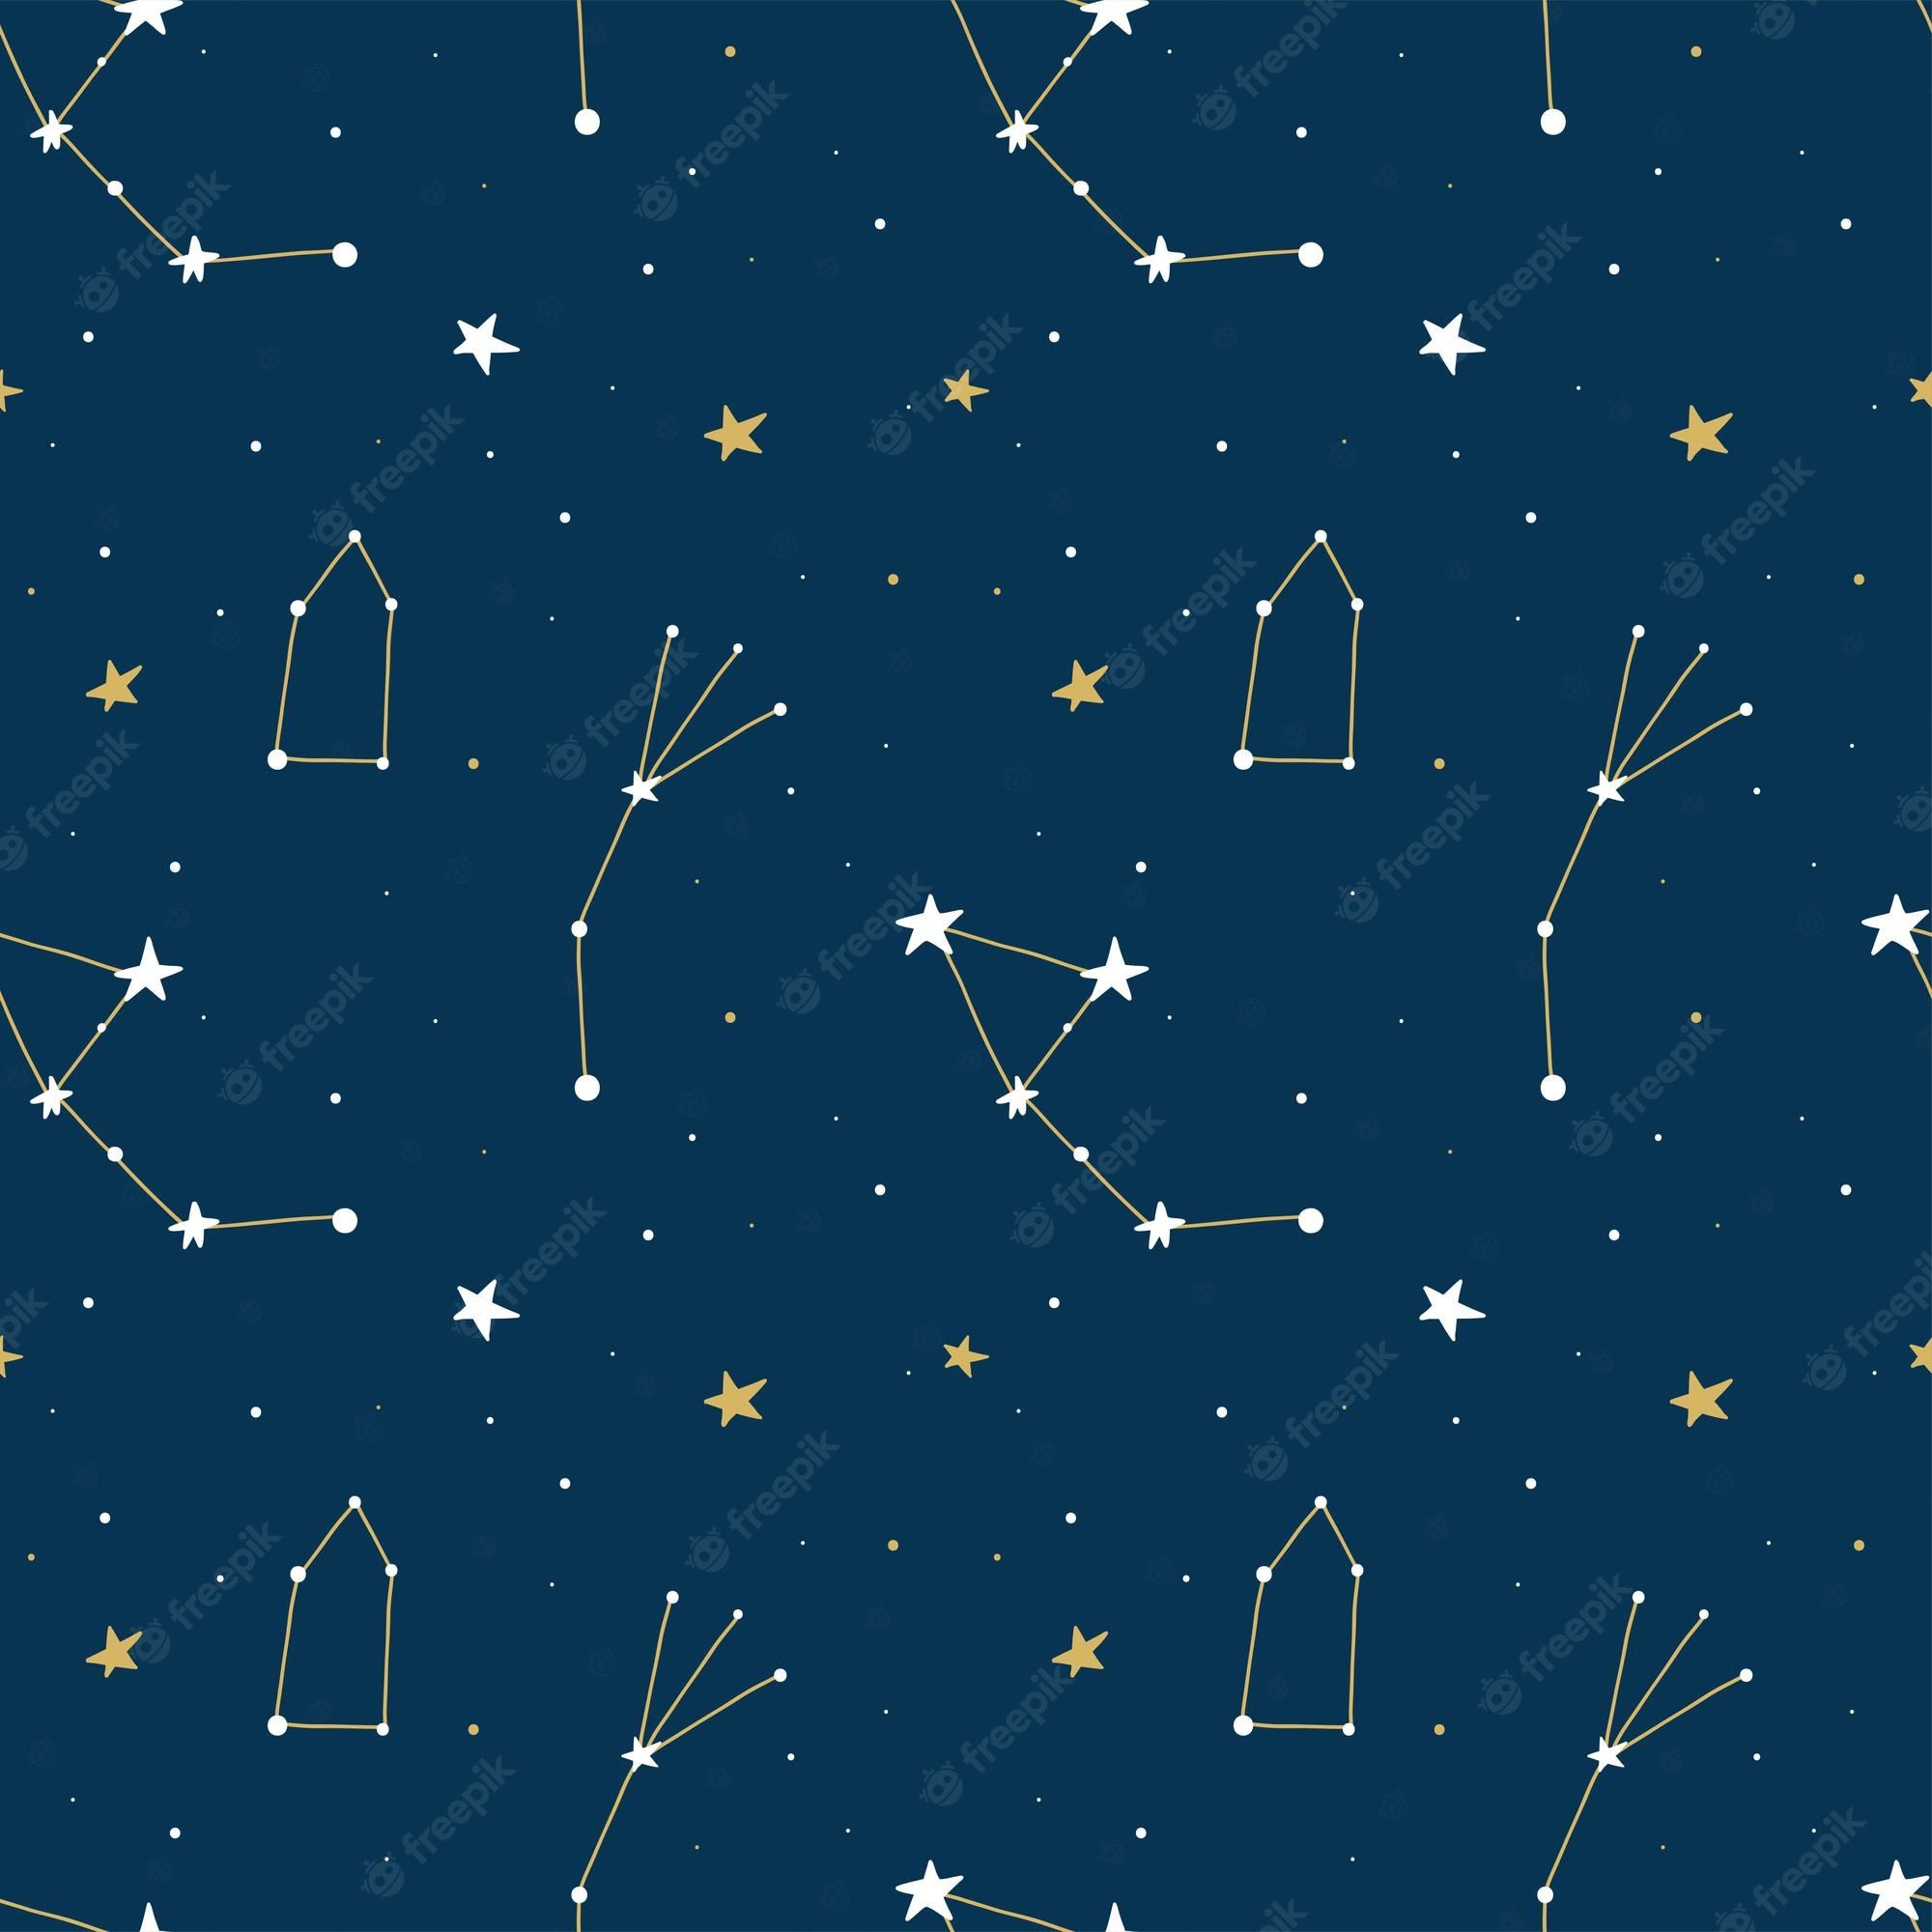 Premium Vector. Constellations and stars seamless pattern white and gold celestial objects on blue background space wallpaper astronomy and astrology backdrop zodiac horoscope elements vector isolated print